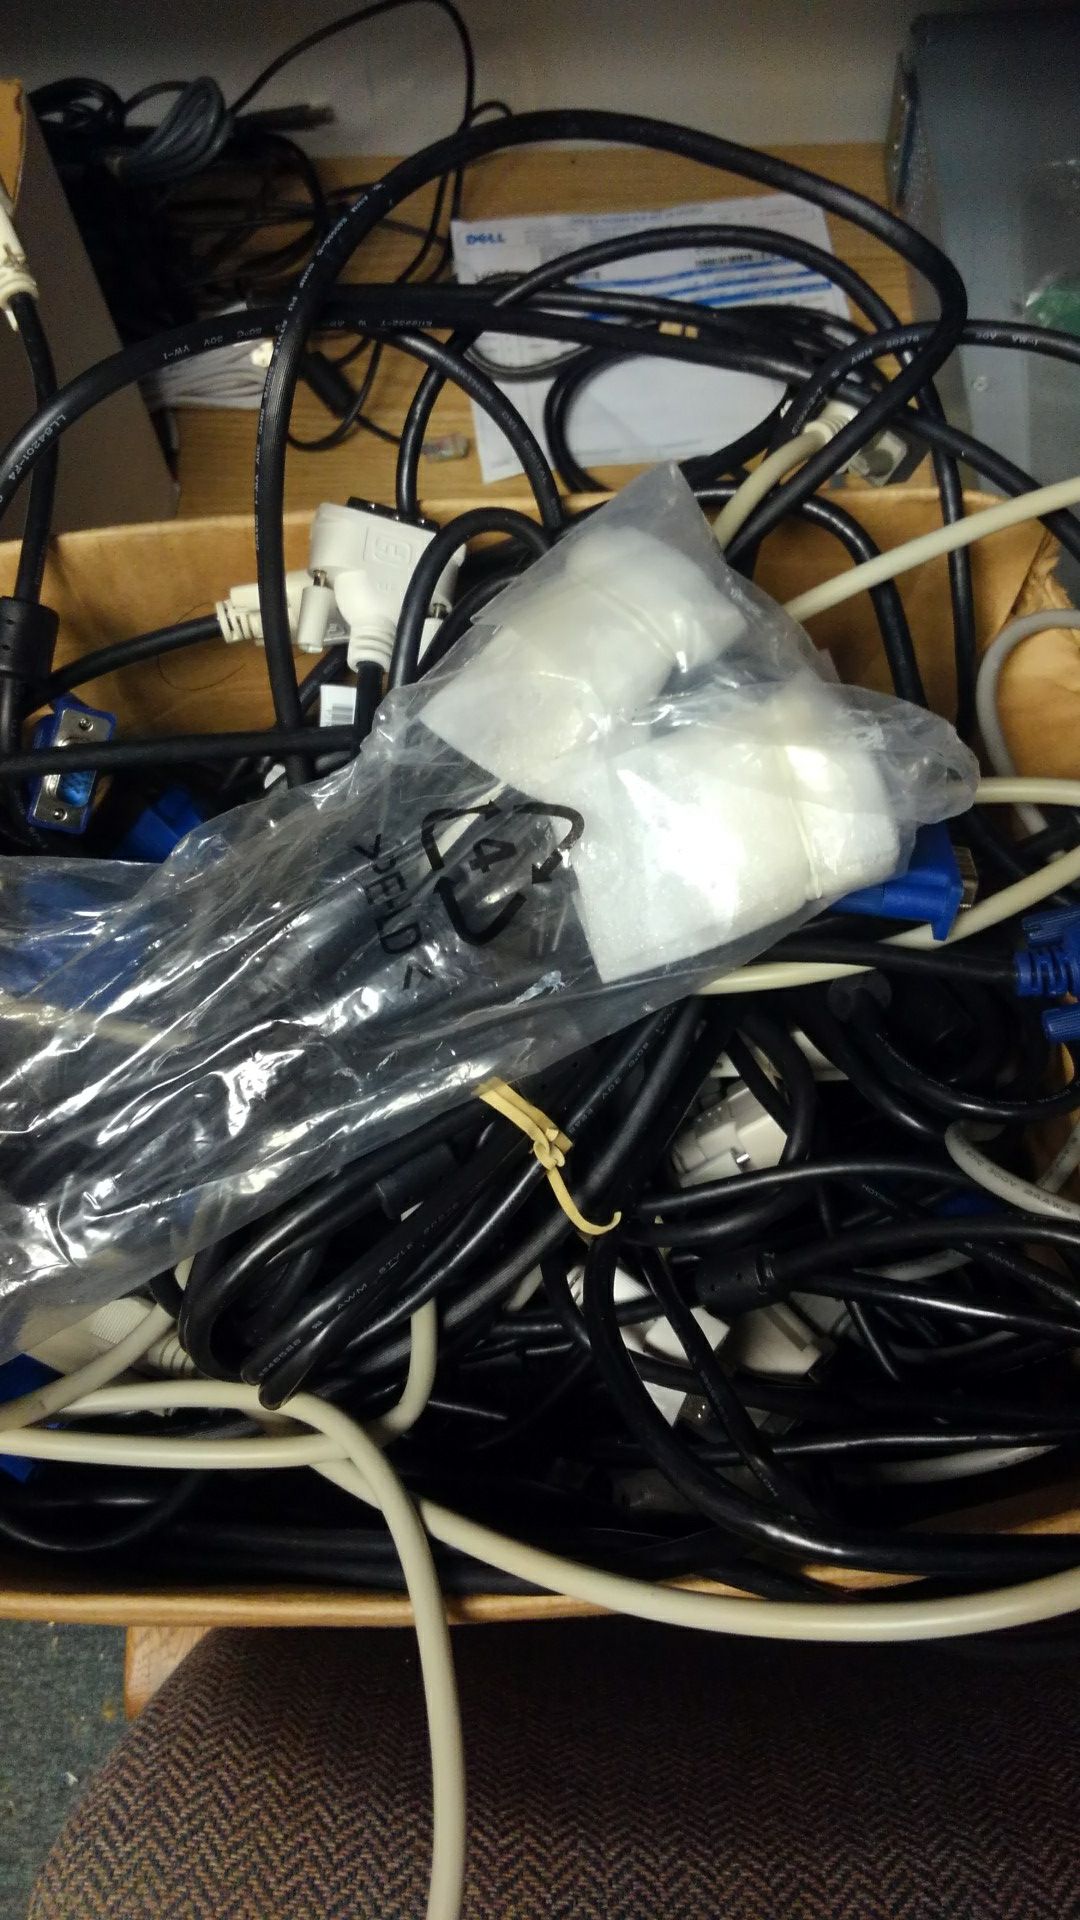 Video cables